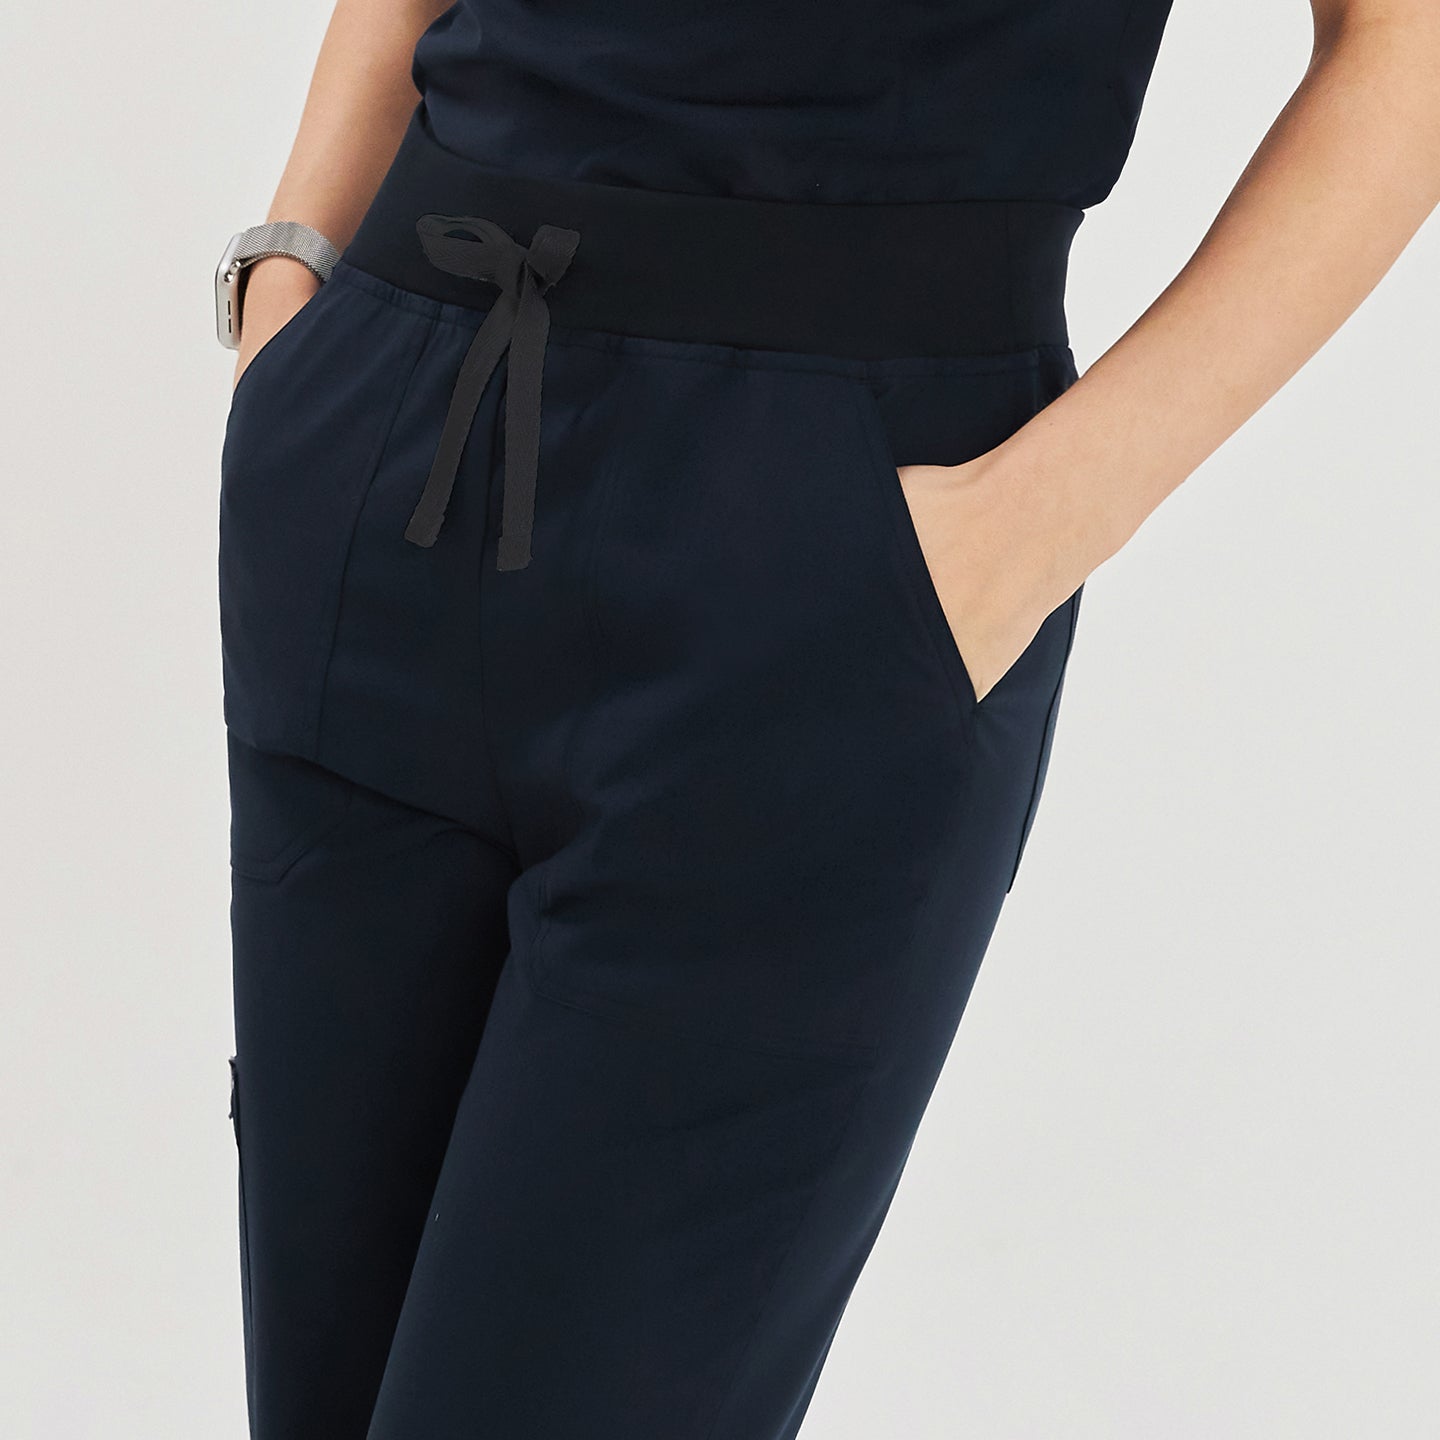 Close-up of model in navy jogger scrub pants showing the elastic waistband with a drawstring and side pockets,Navy